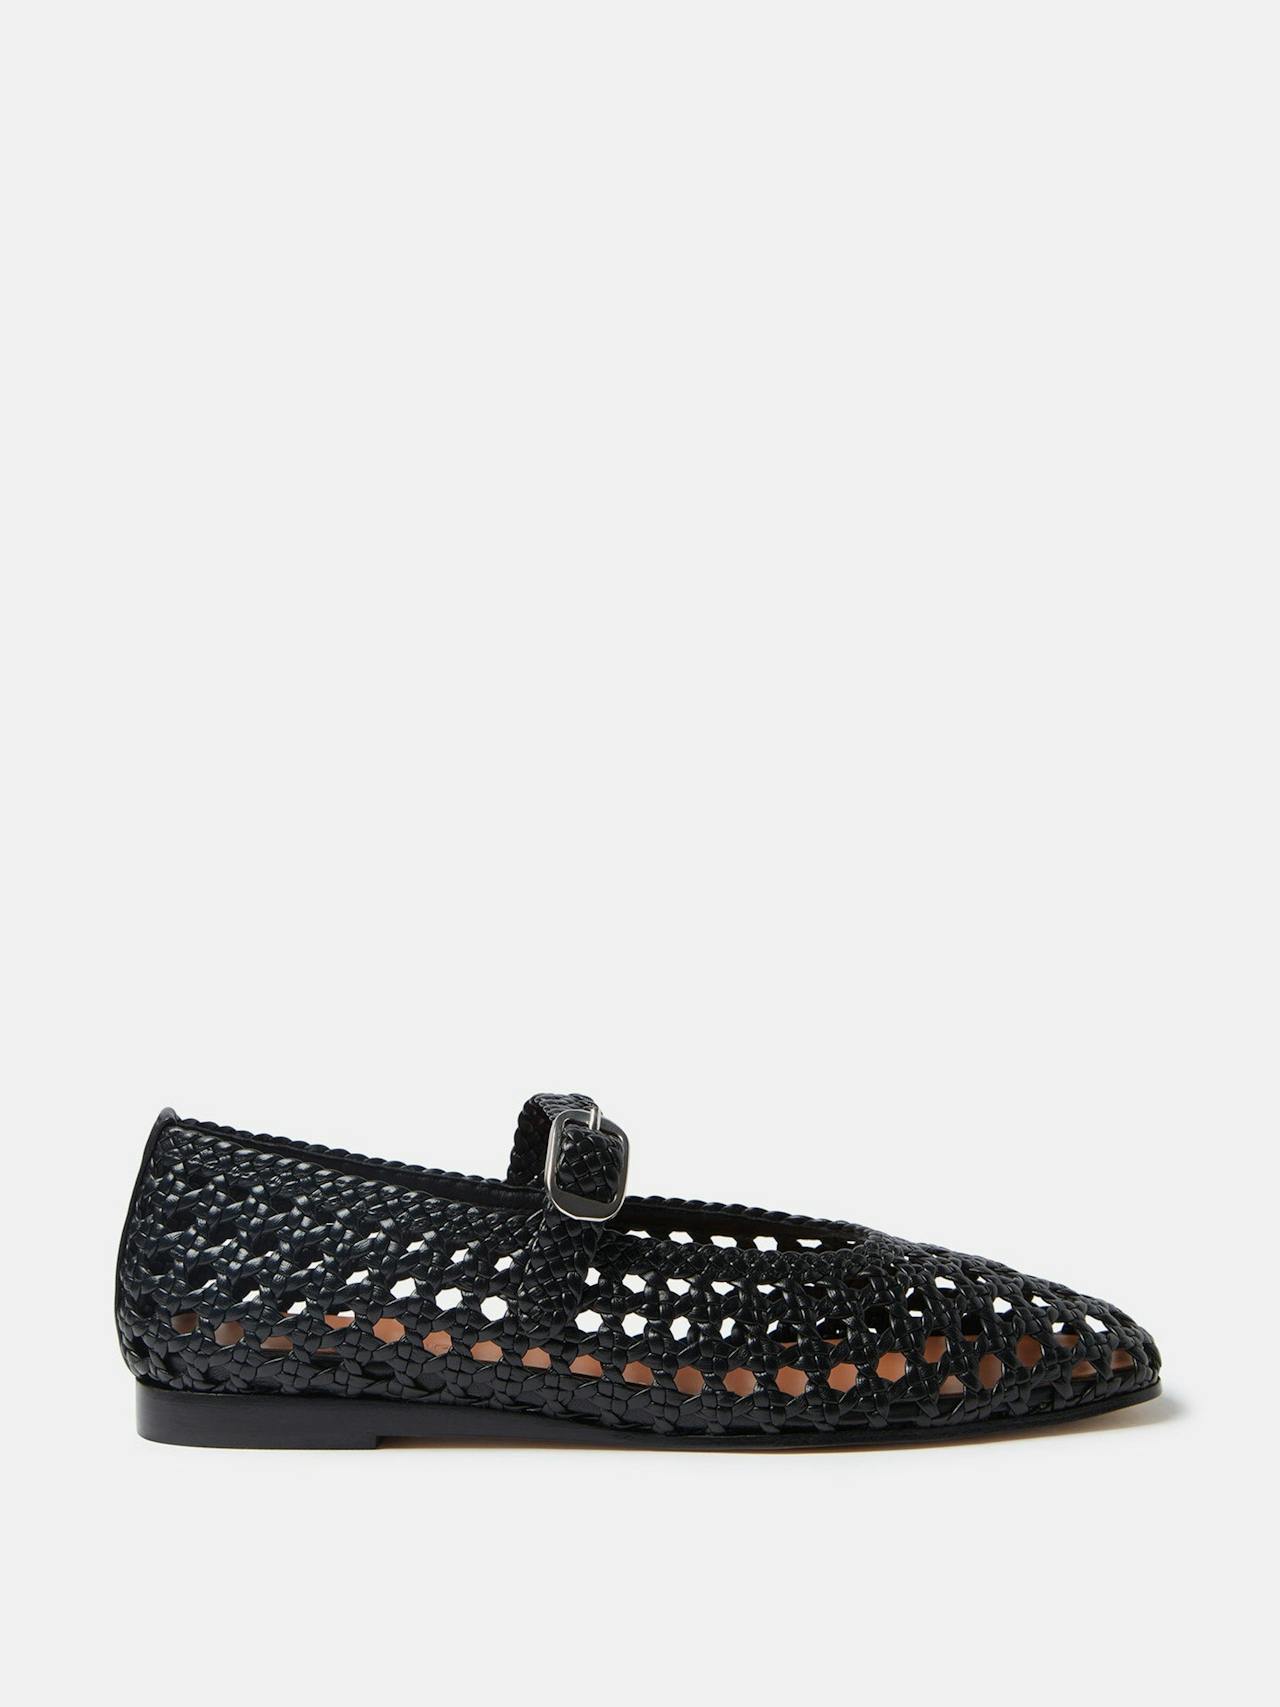 Black leather woven Mary Jane flats